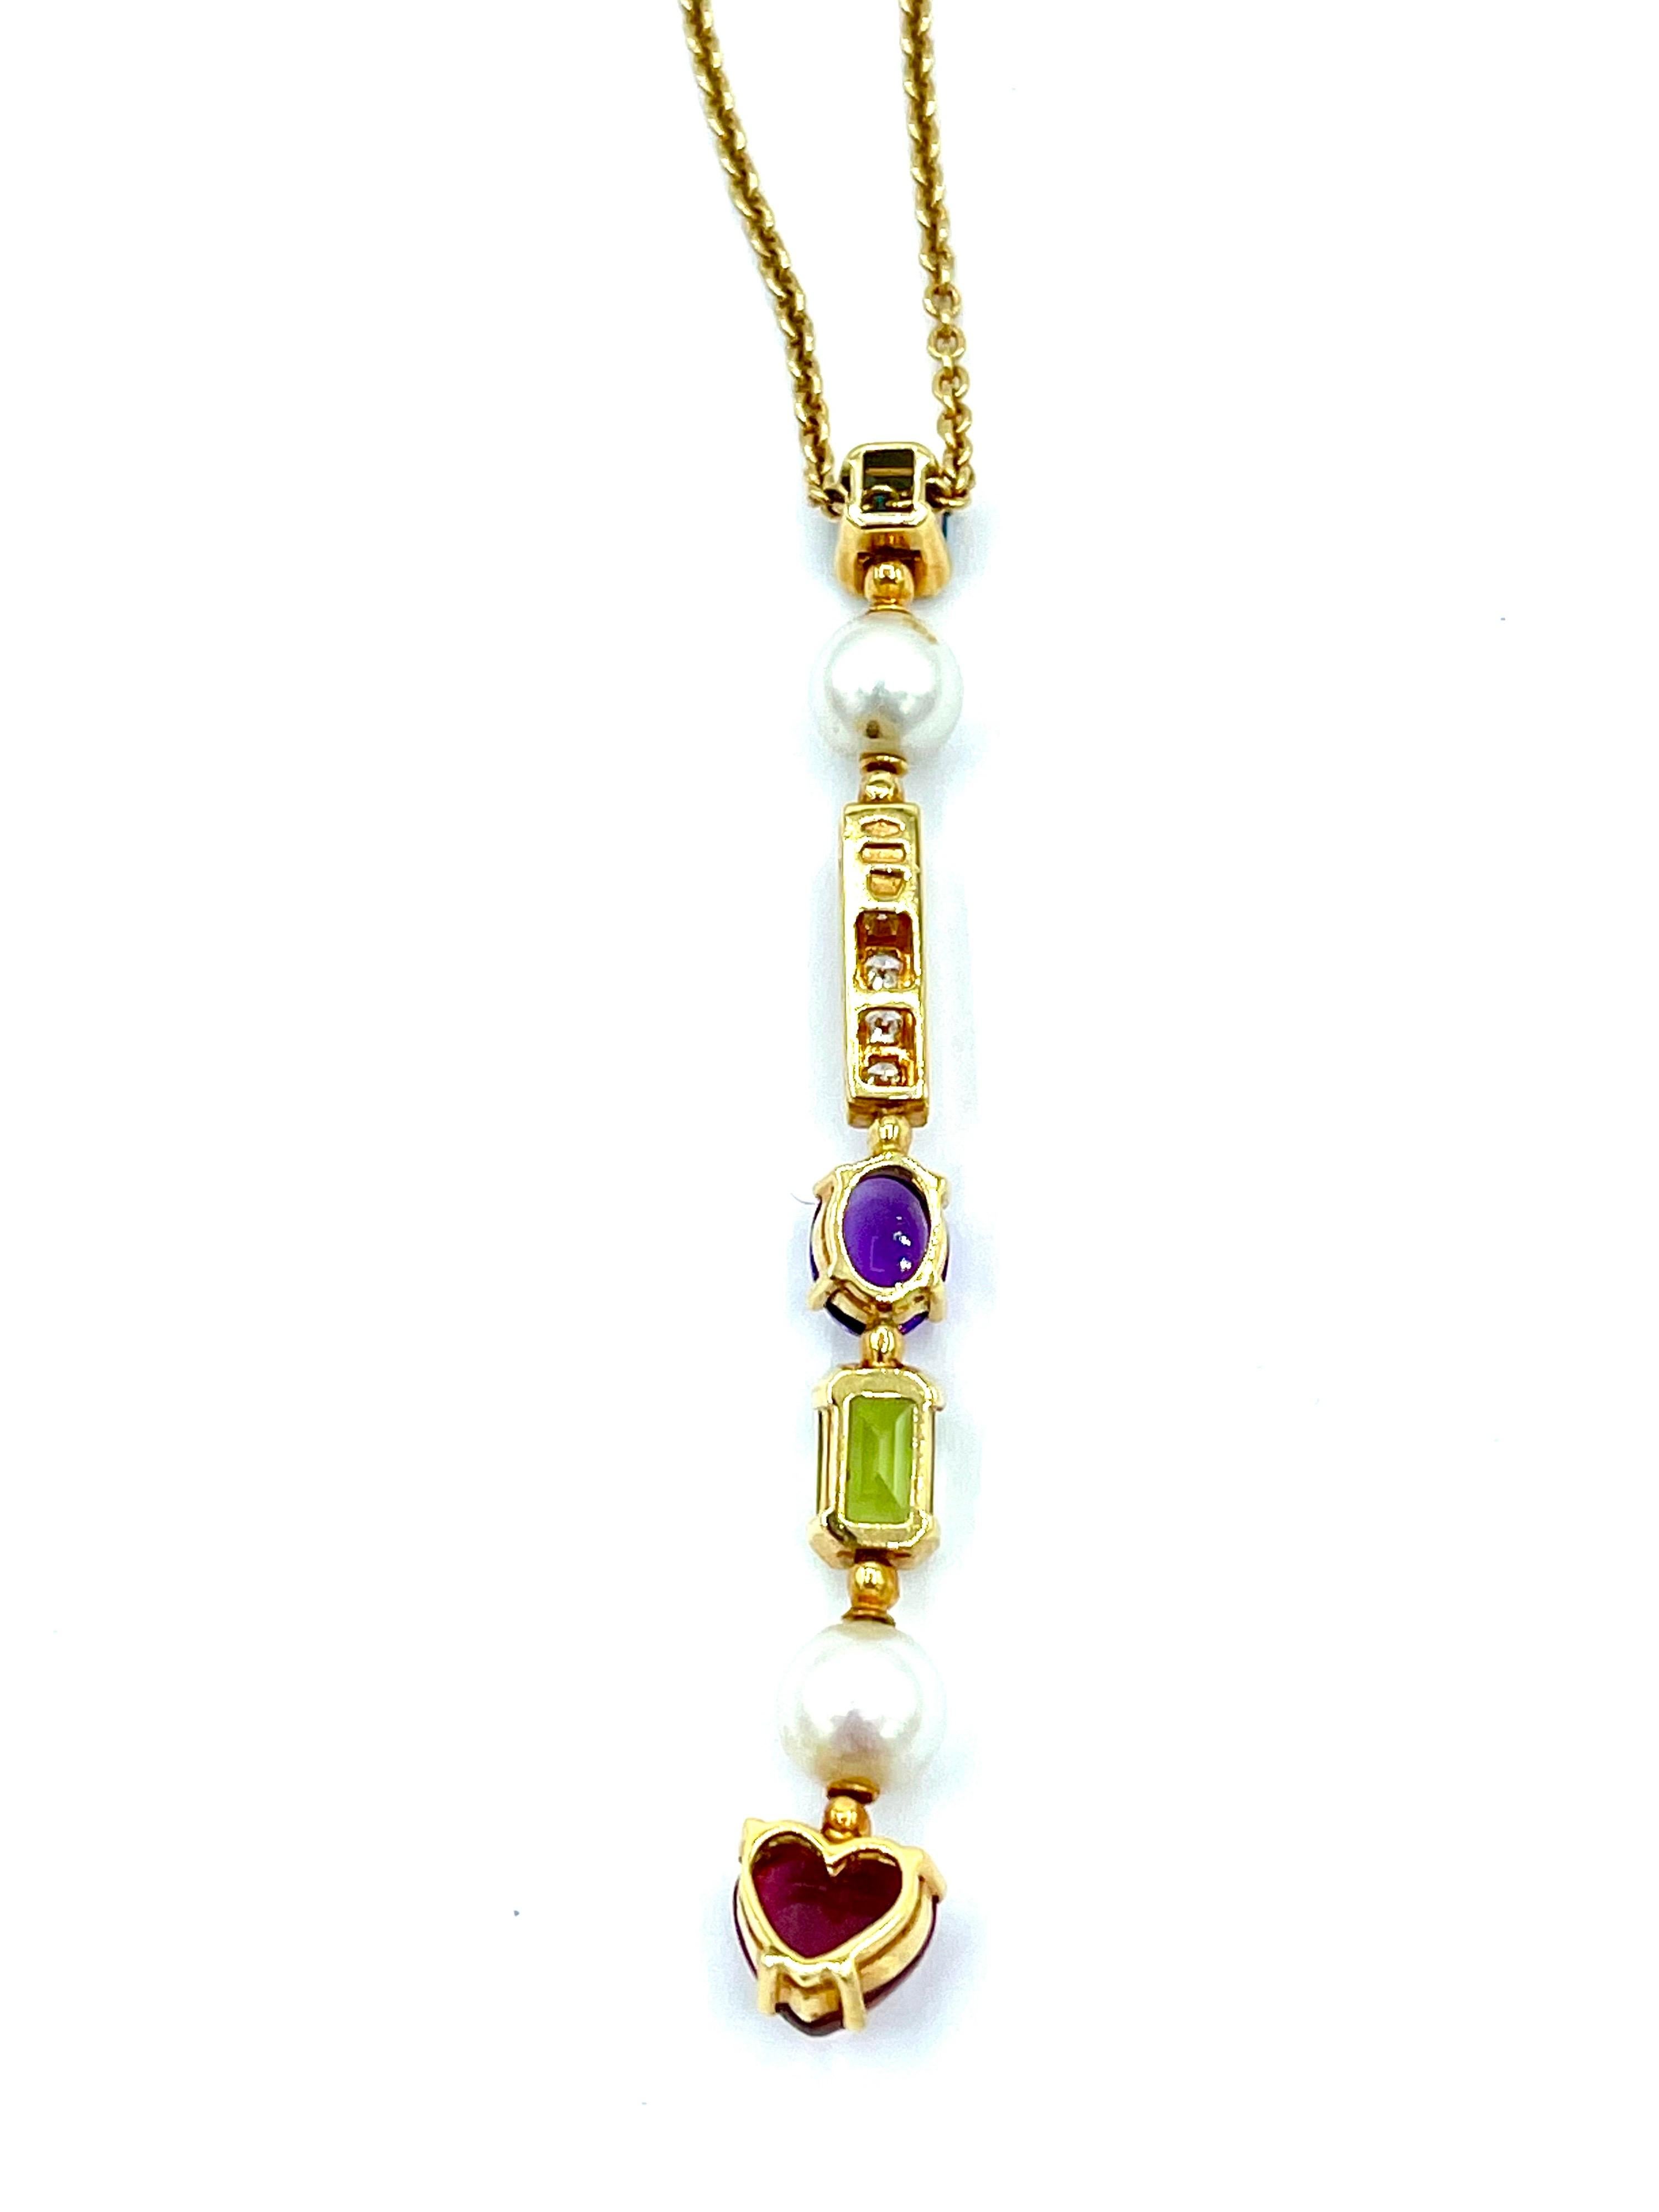 necklace with line pendant